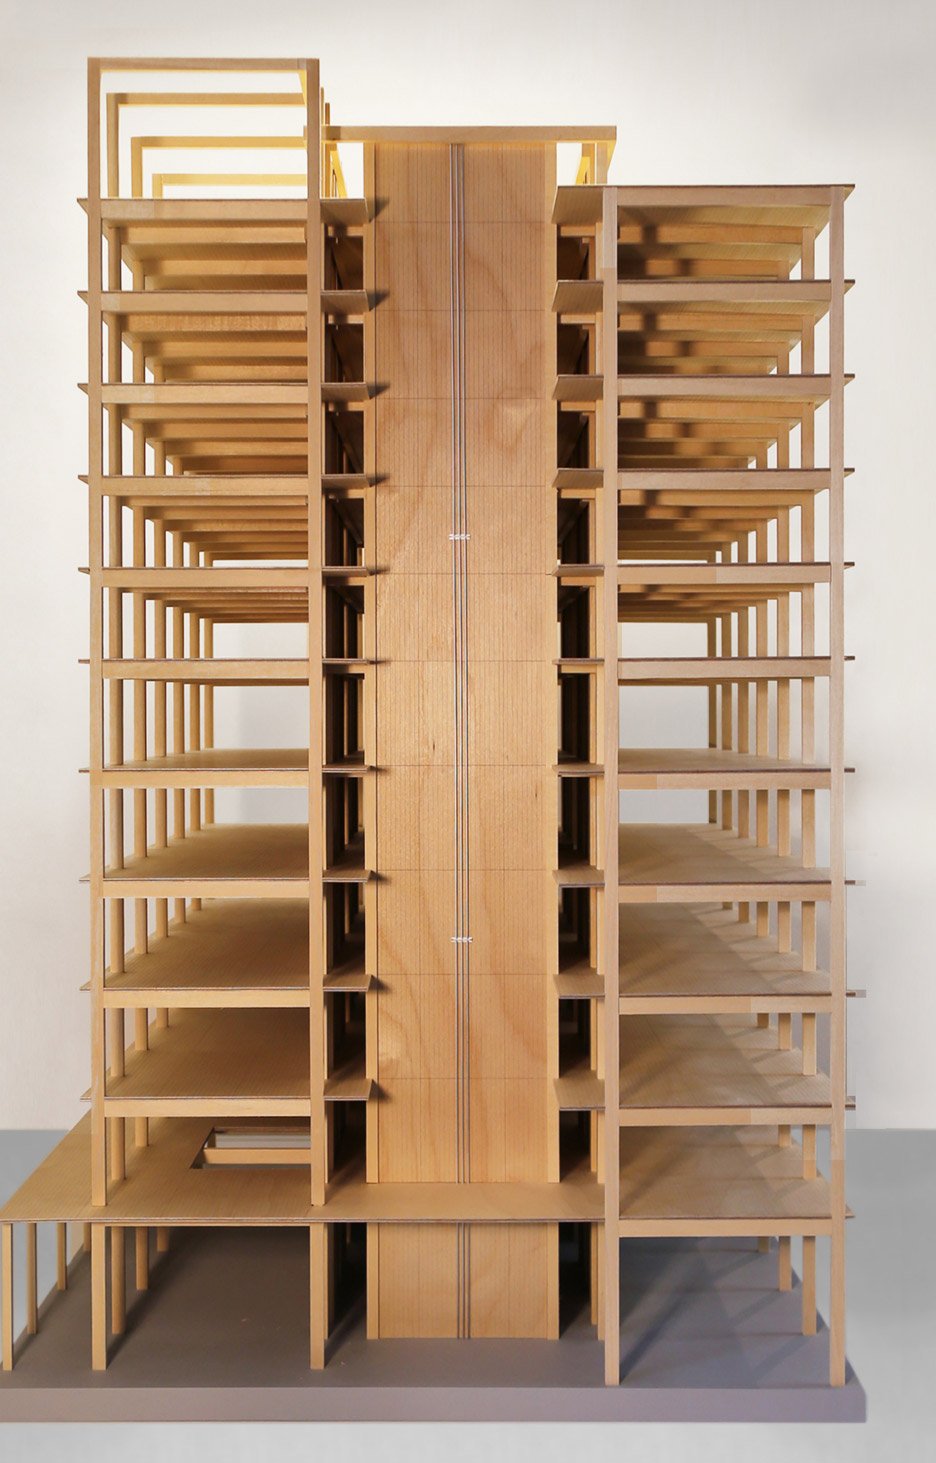 Framework by Lever Architects